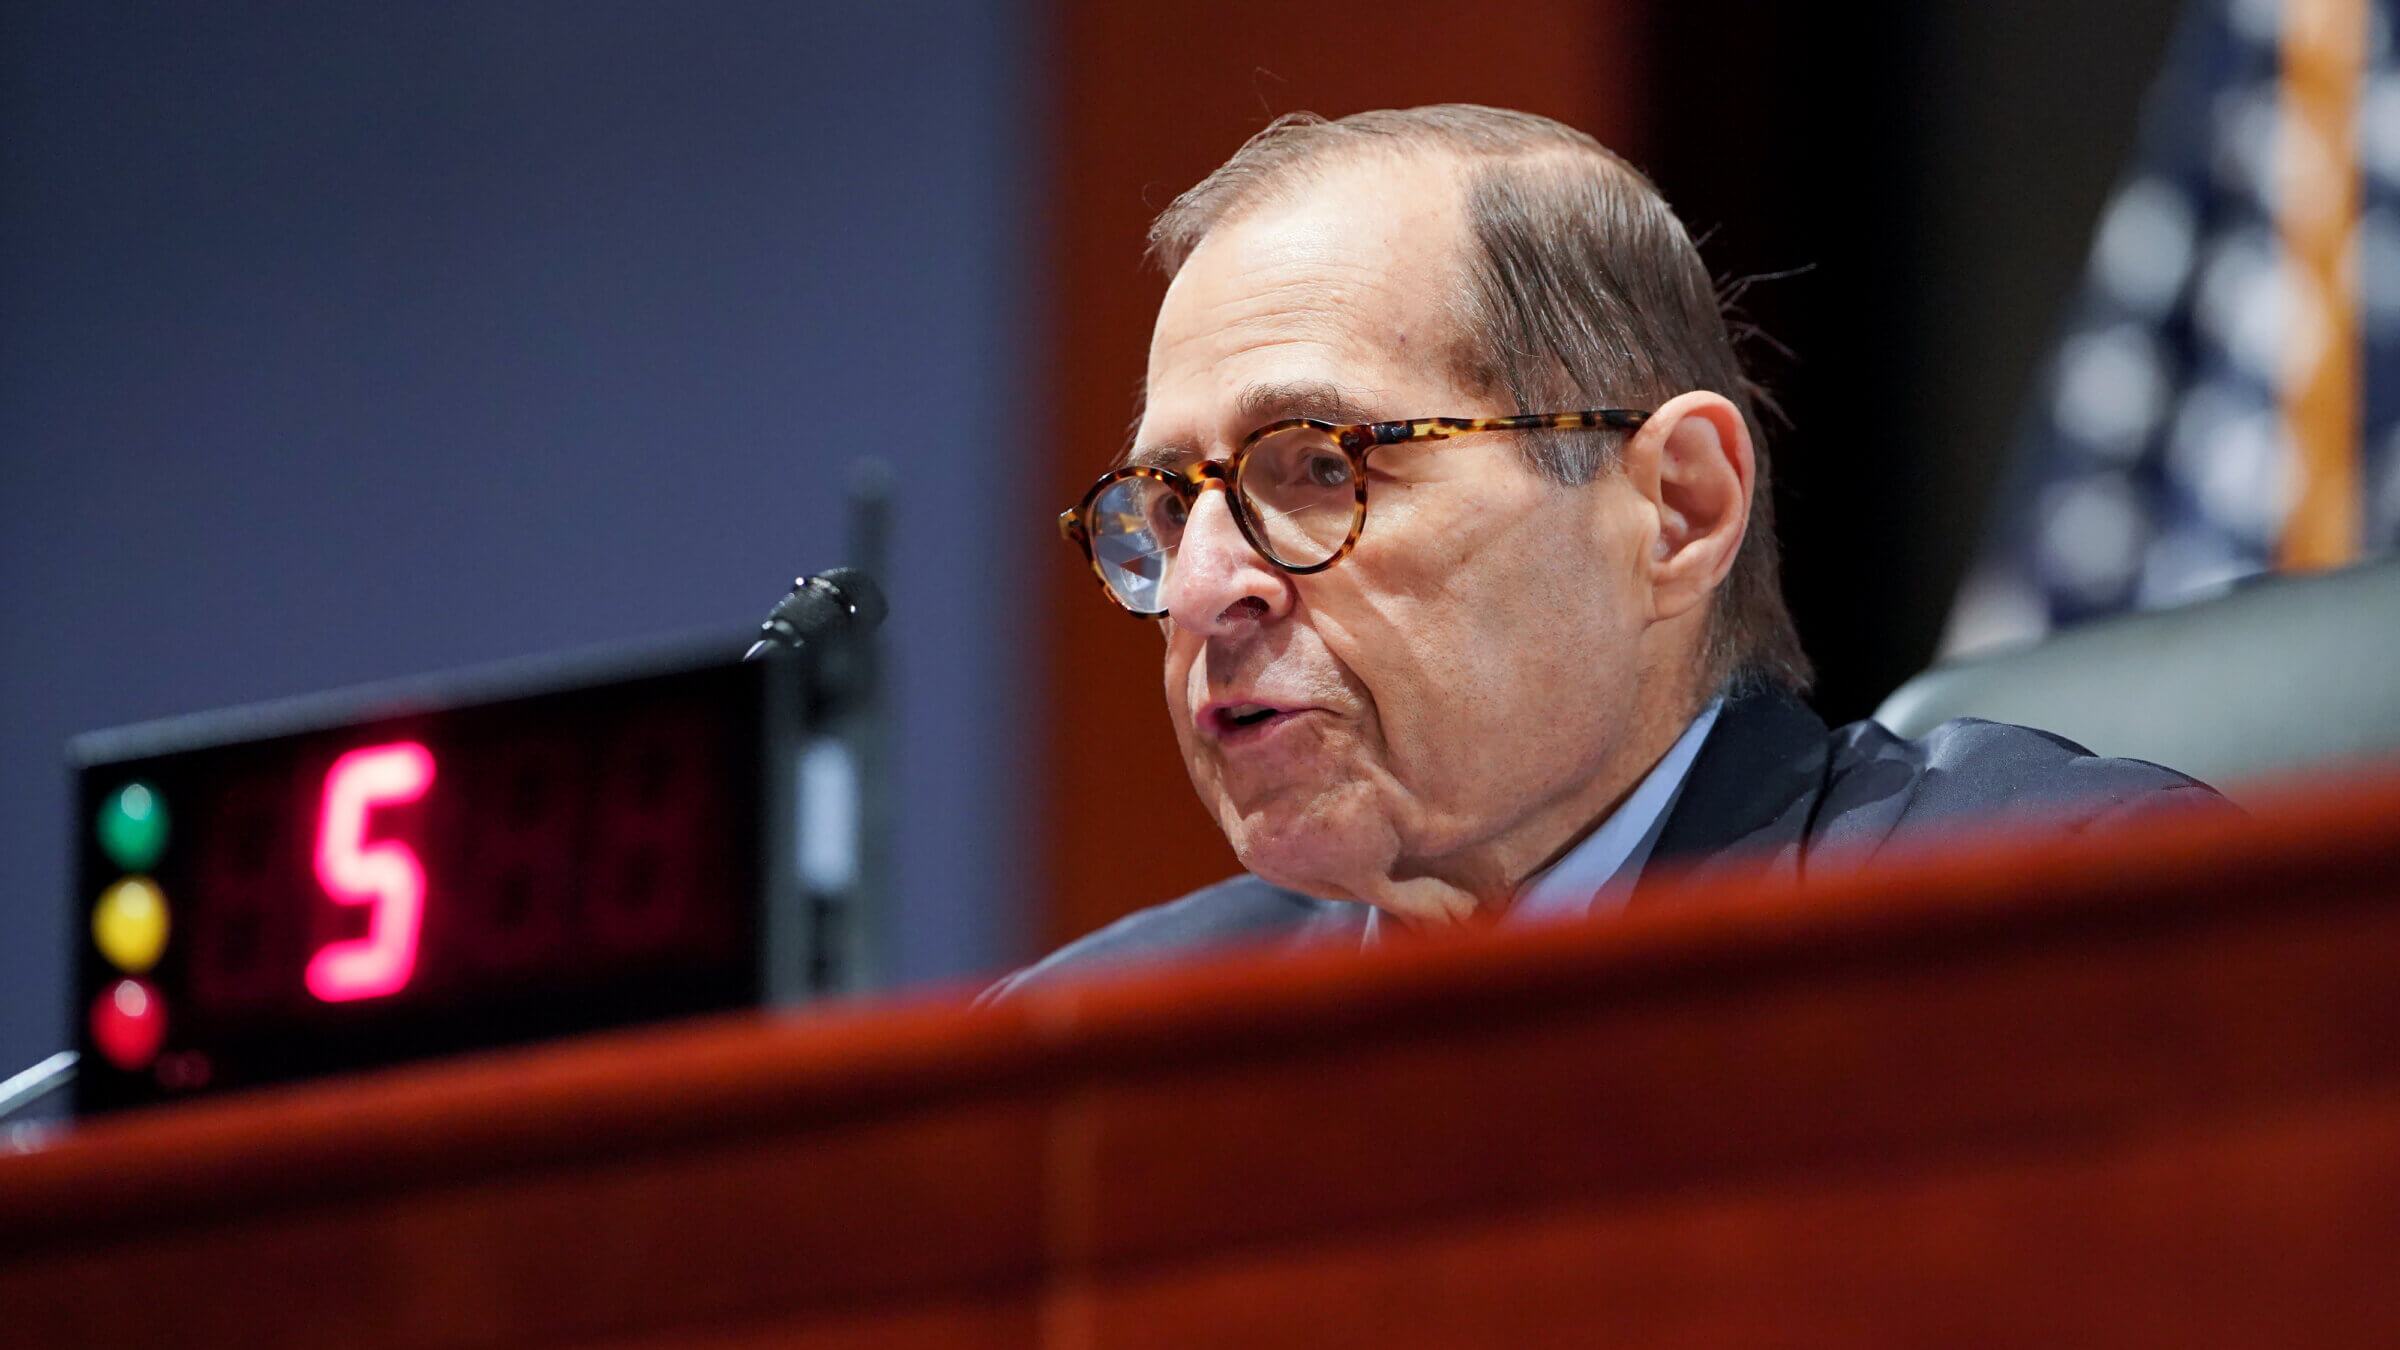 House Judiciary Committee Chairman Rep. Jerrold Nadler at a hearing on October 21, 2021